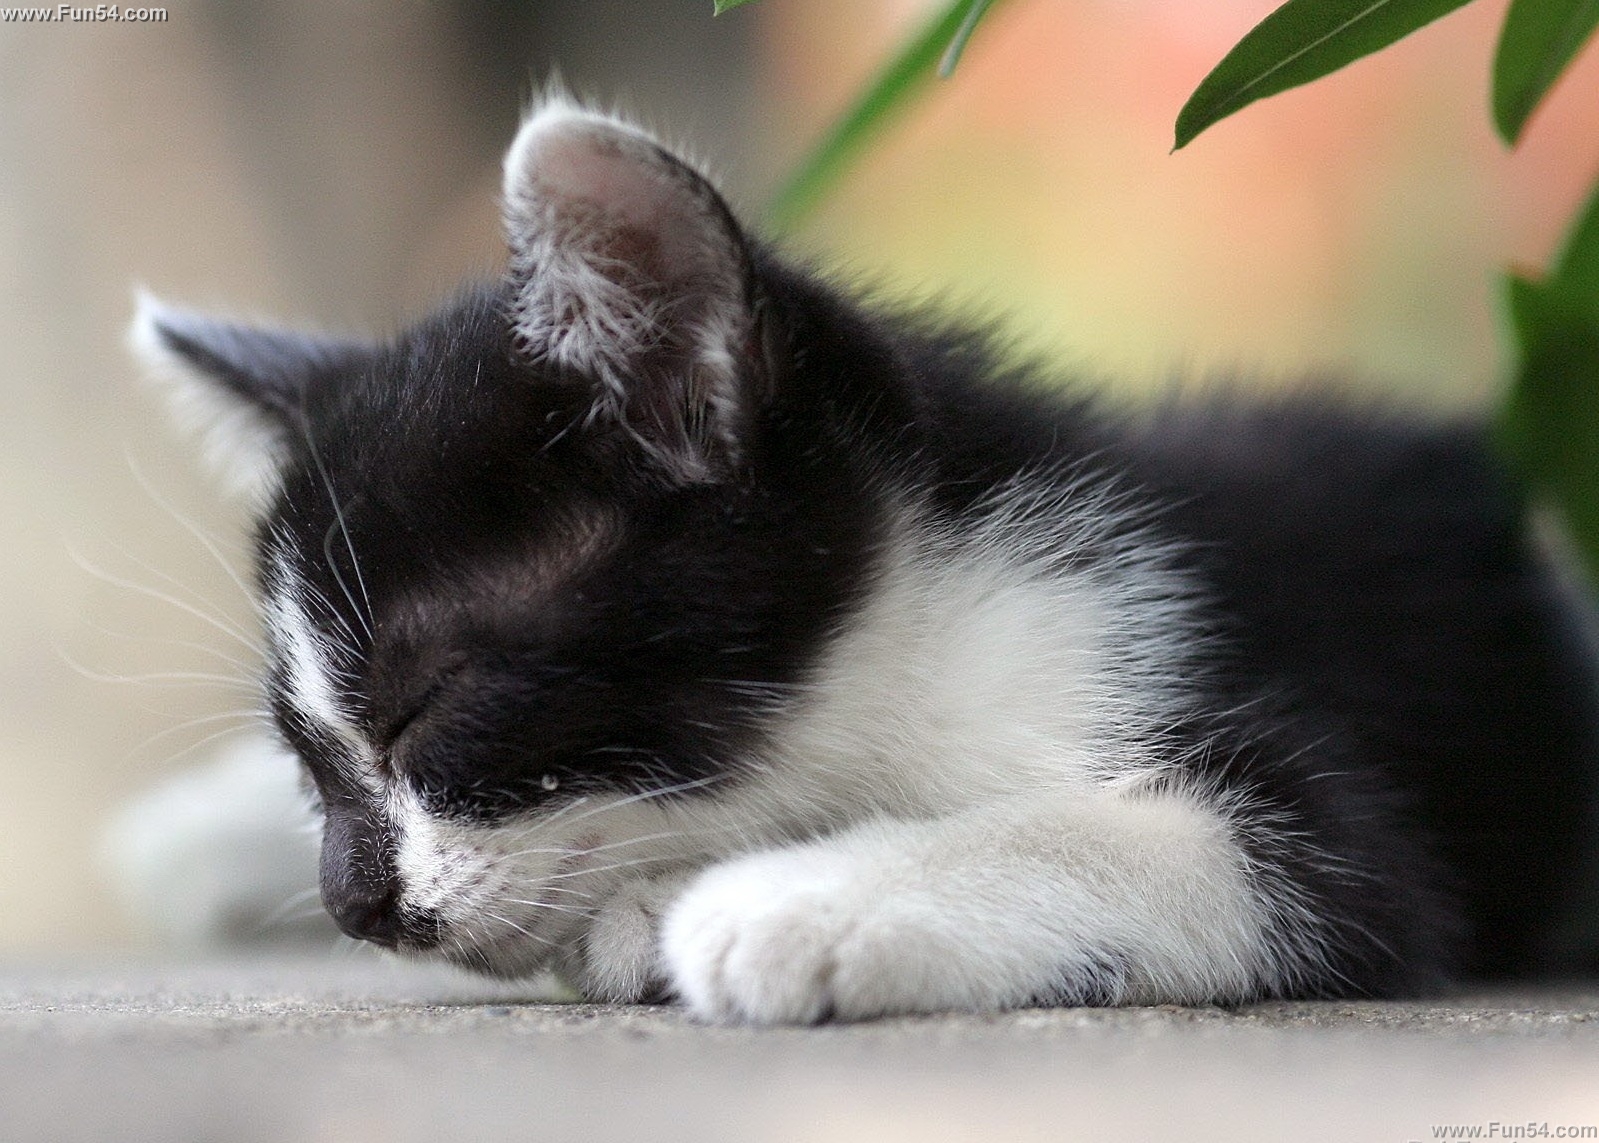  download Cute Black White Cat Sleeping on the Ground 1599x1143